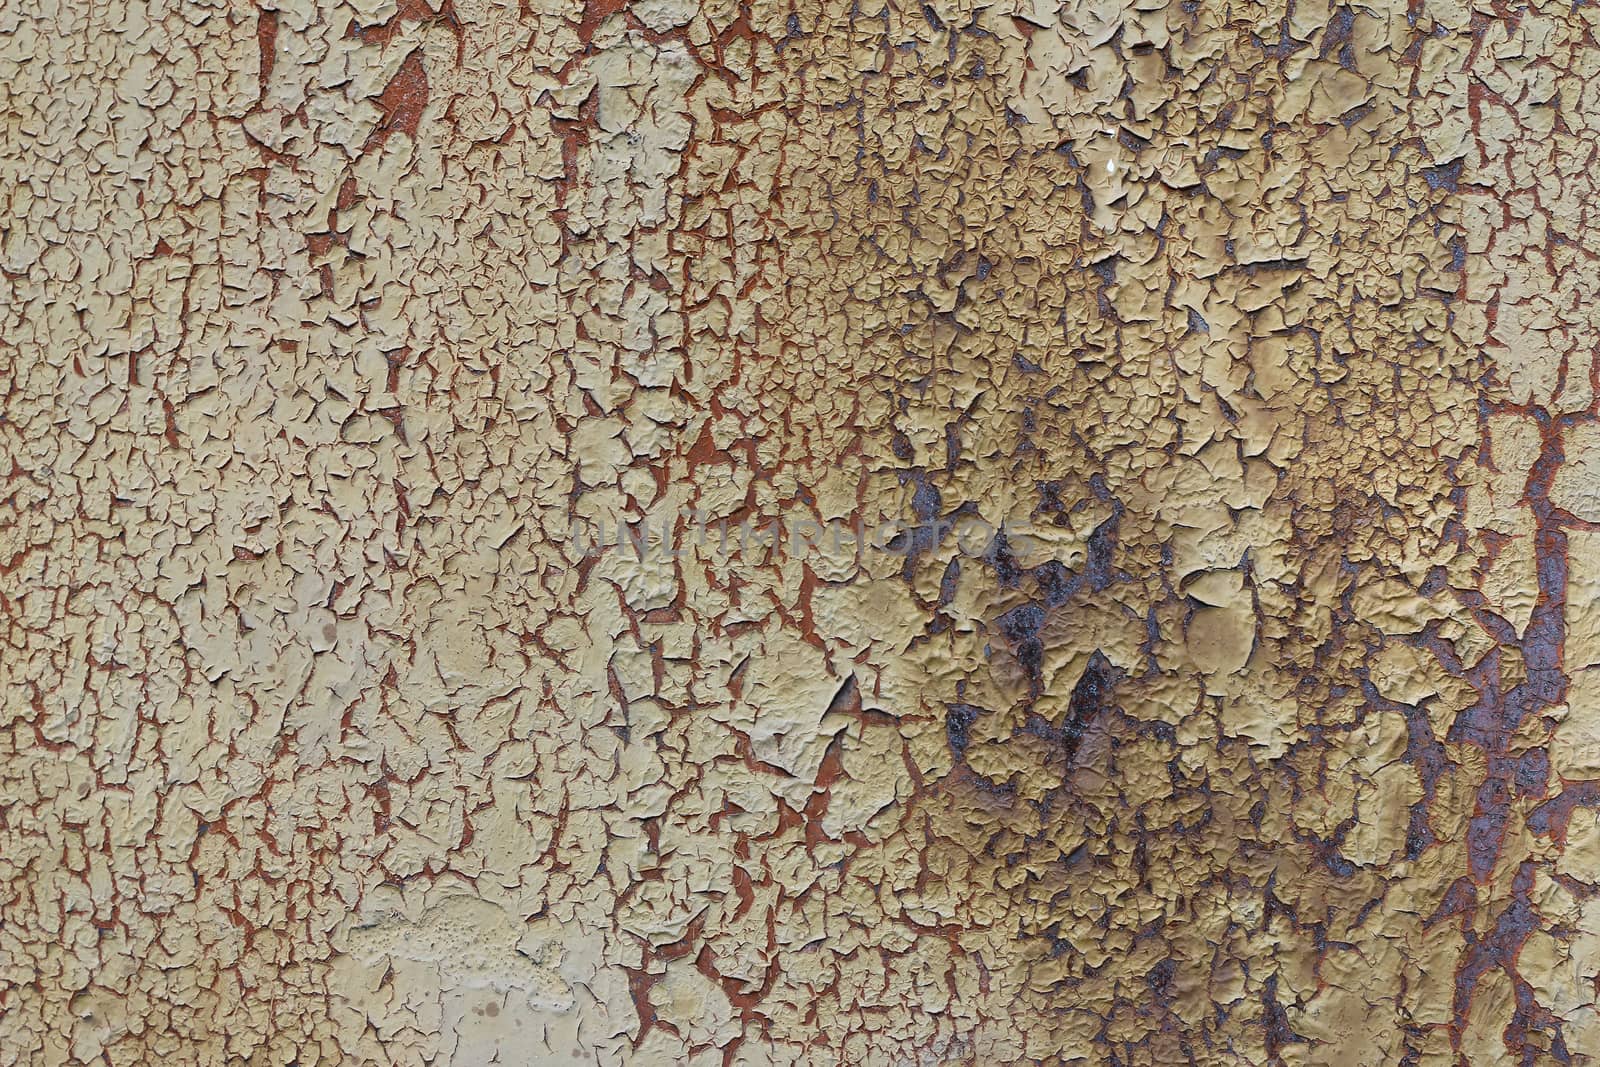 Cracked paint on the rusty iron by Mibuch